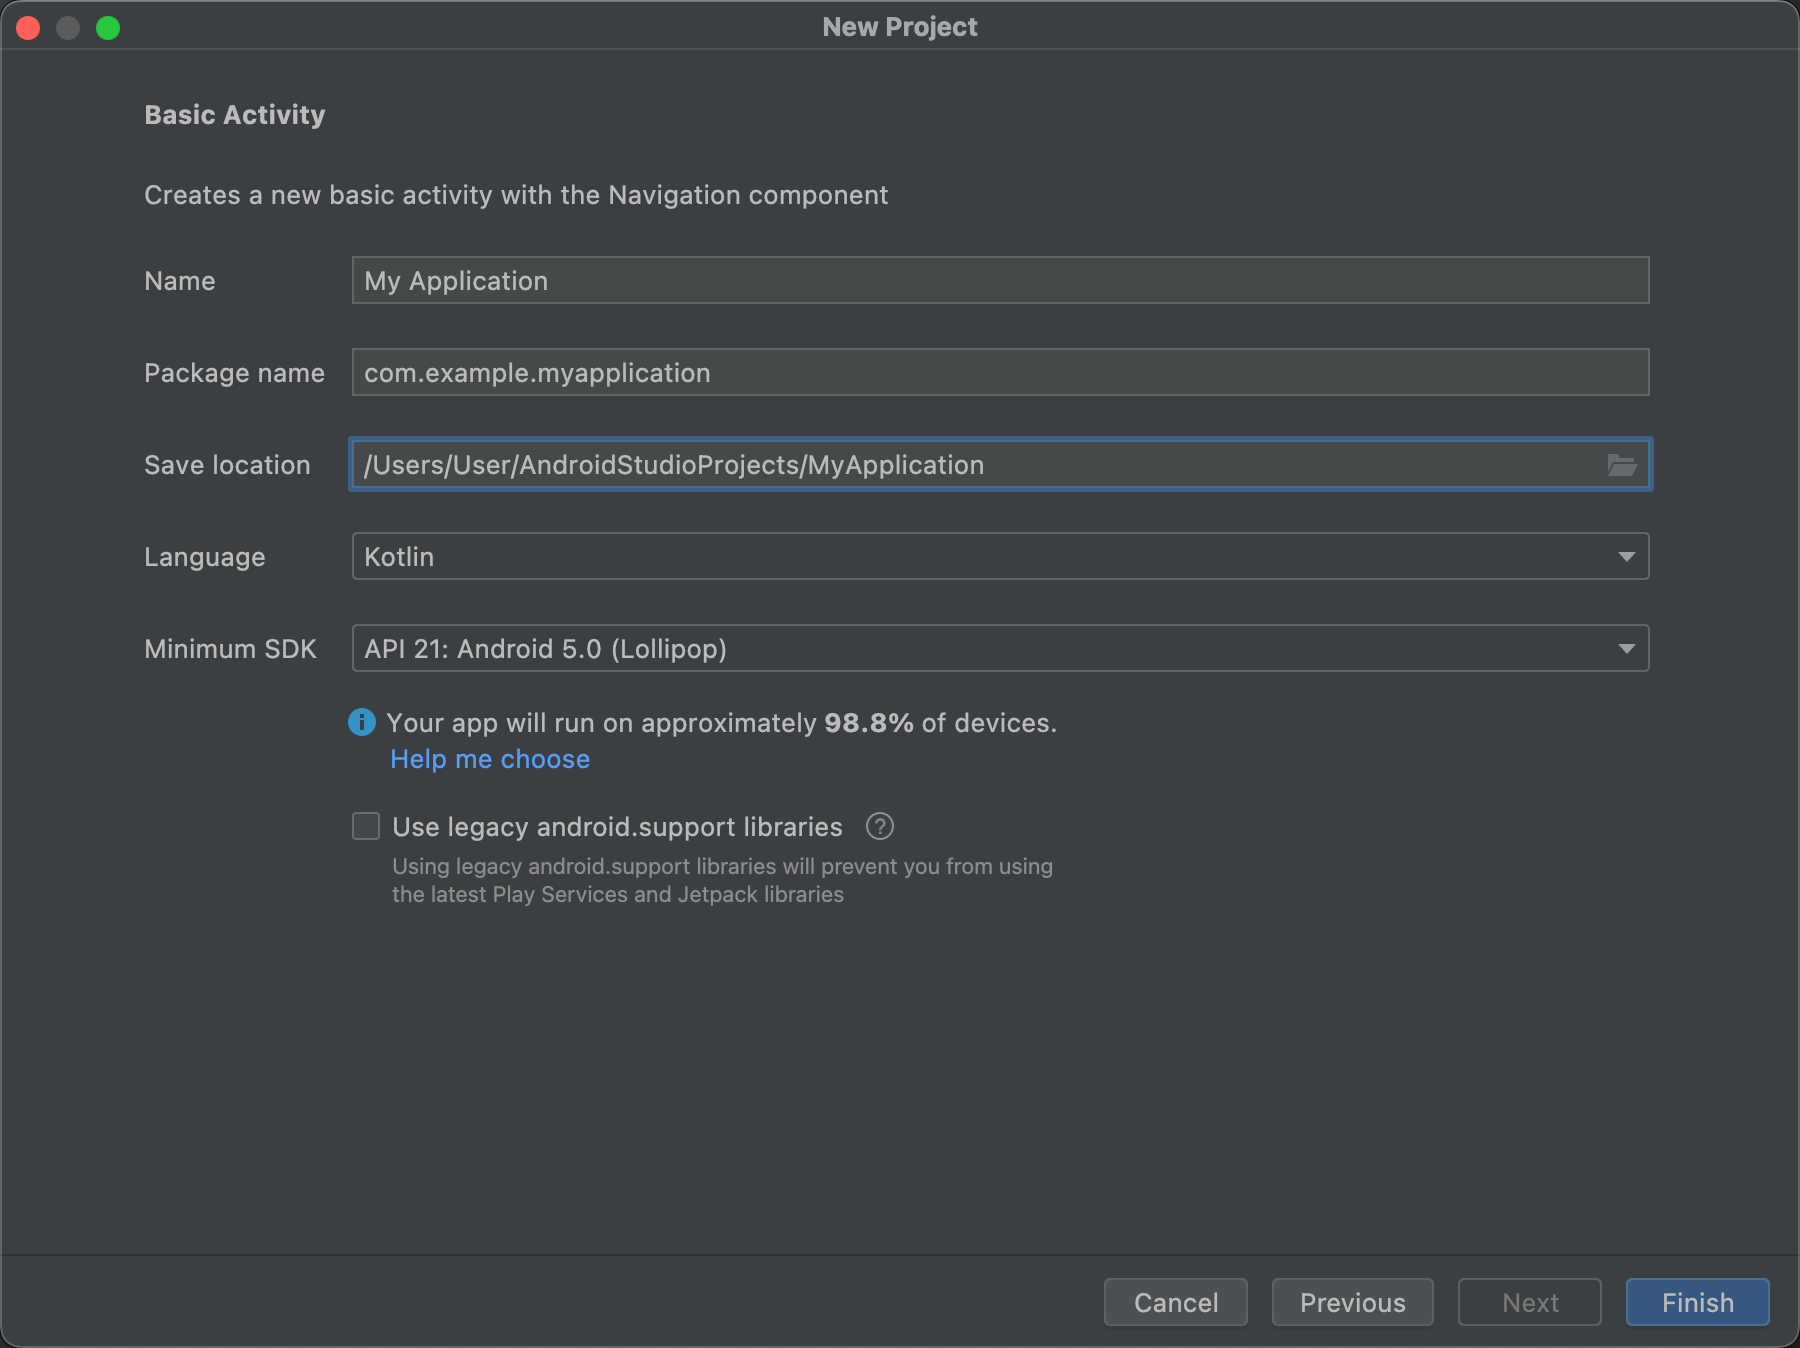 Configure your new project with a few settings.